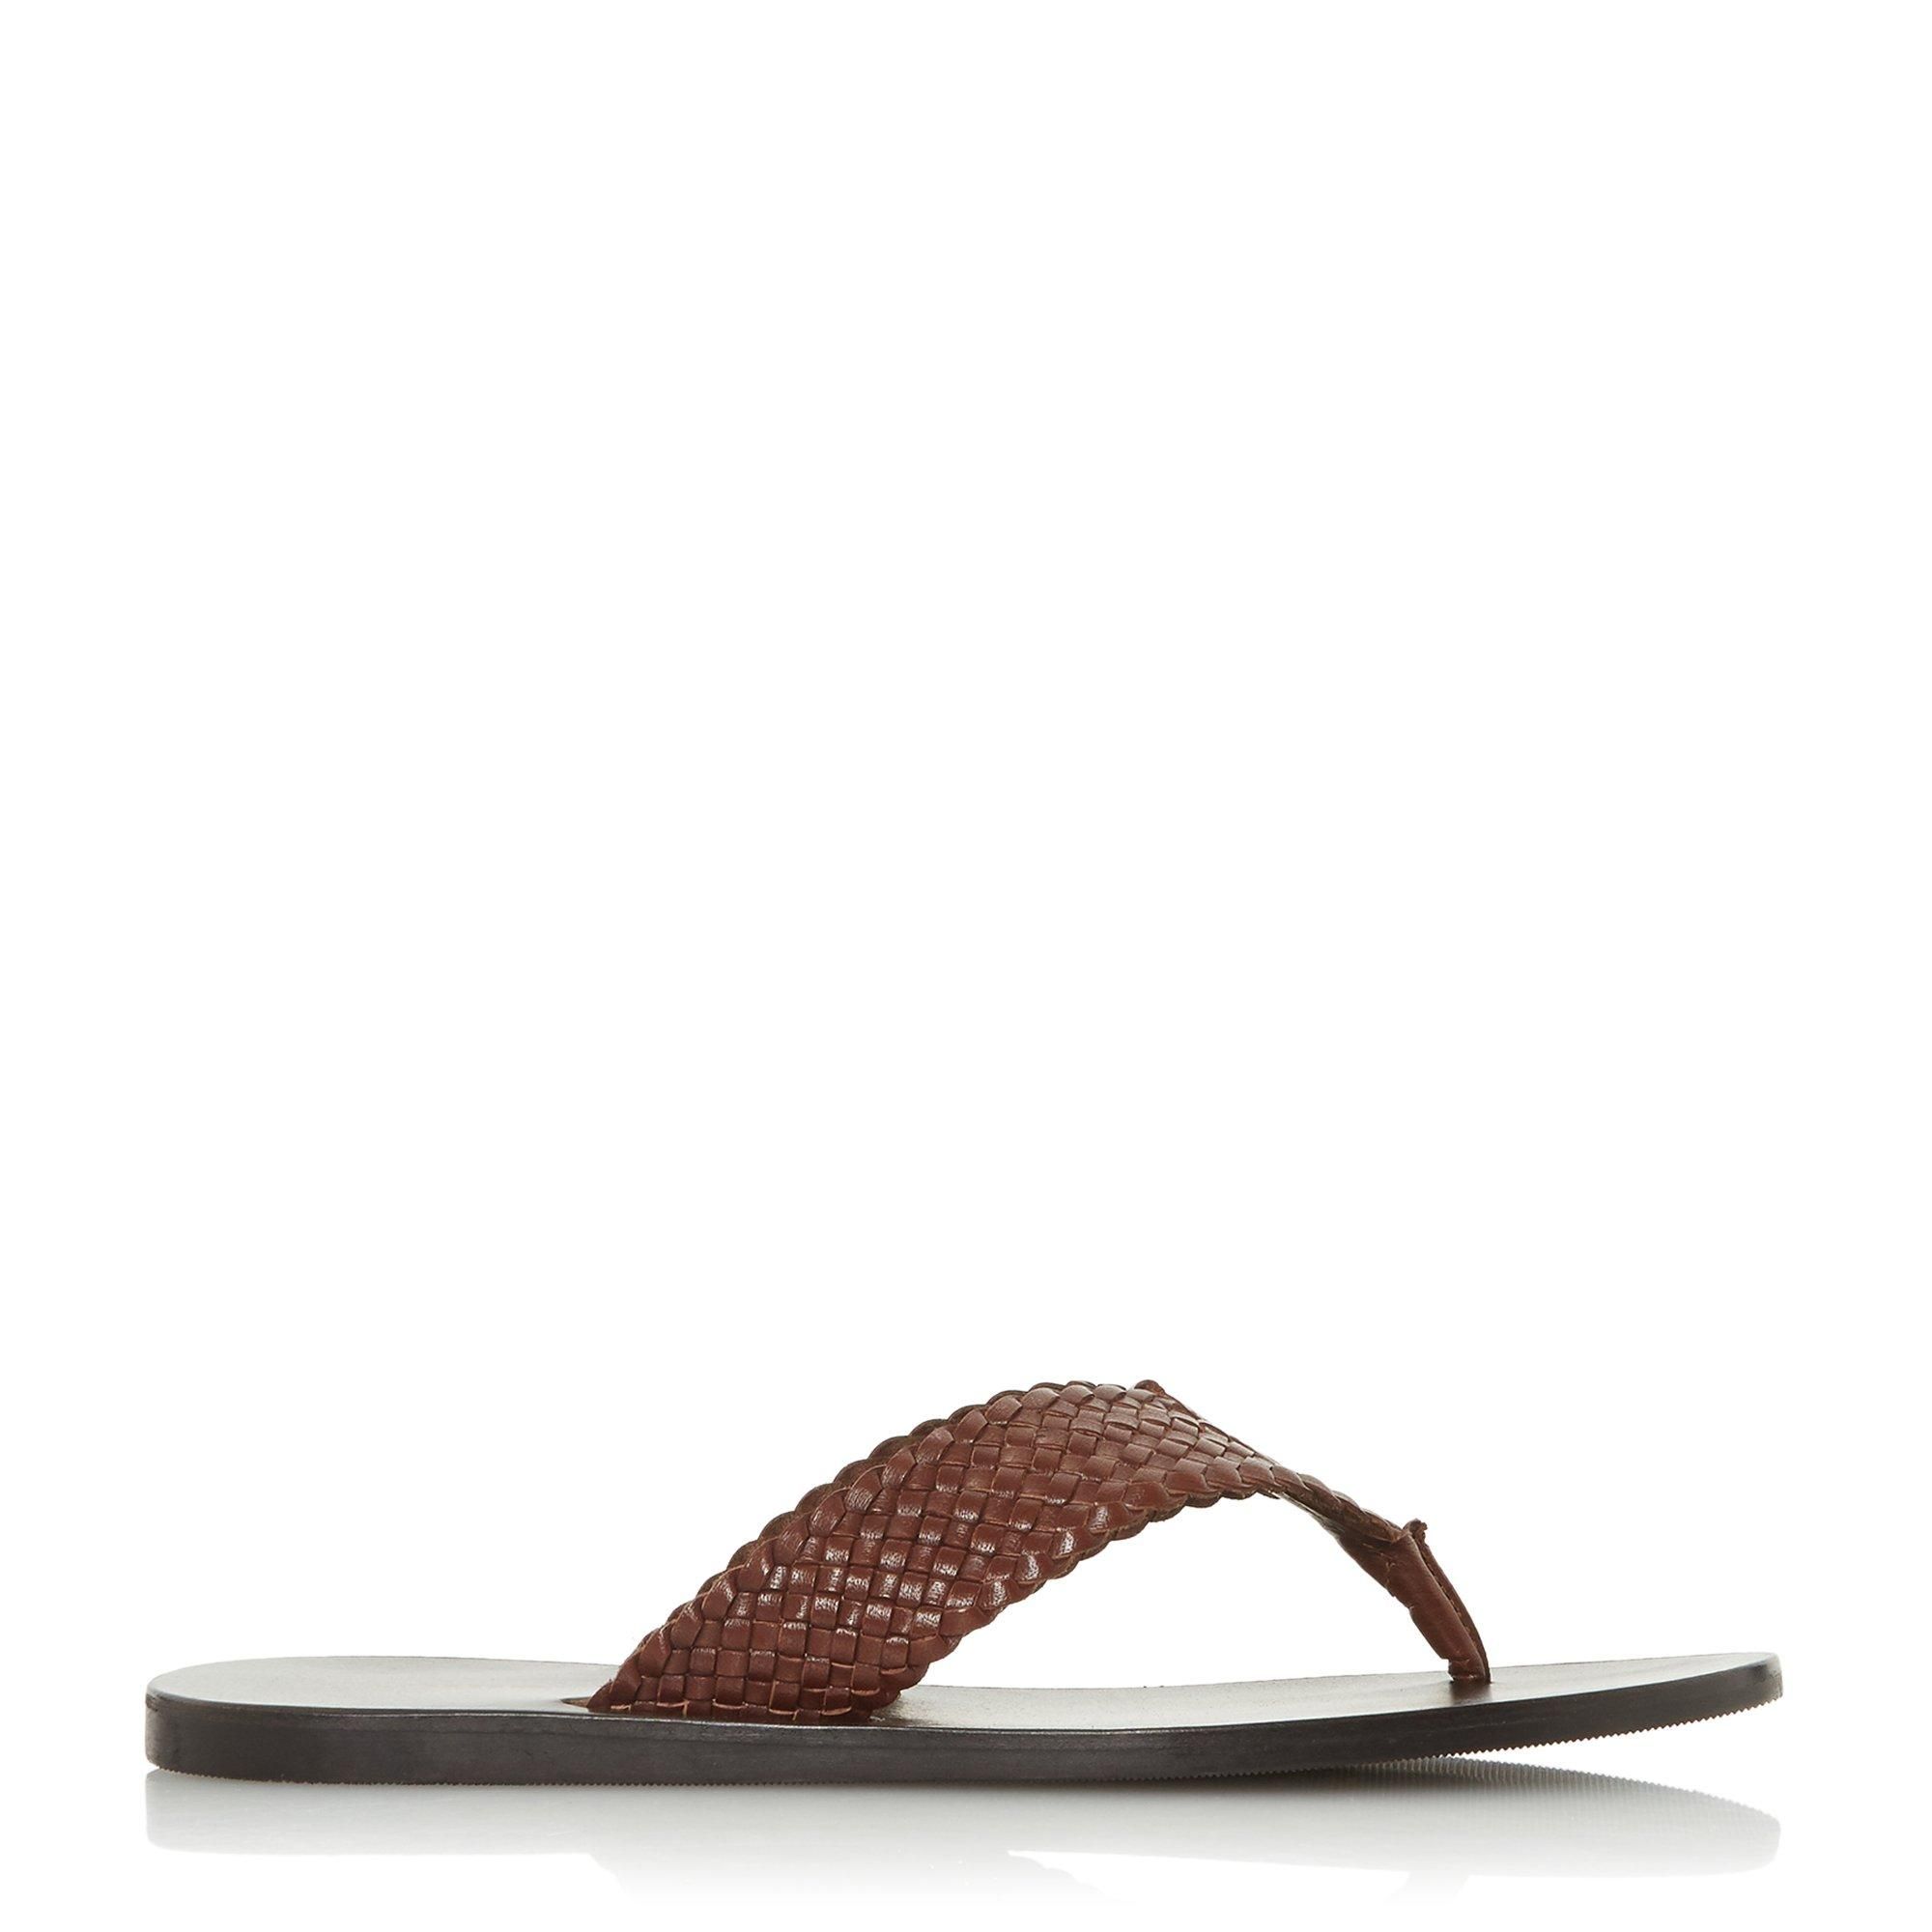 Prepare for warm weather with these woven sandals from Dune London. Made from leather, the woven toe-post straps offer textured interest. Its soft footbed offers enduring comfort while you're out and about.